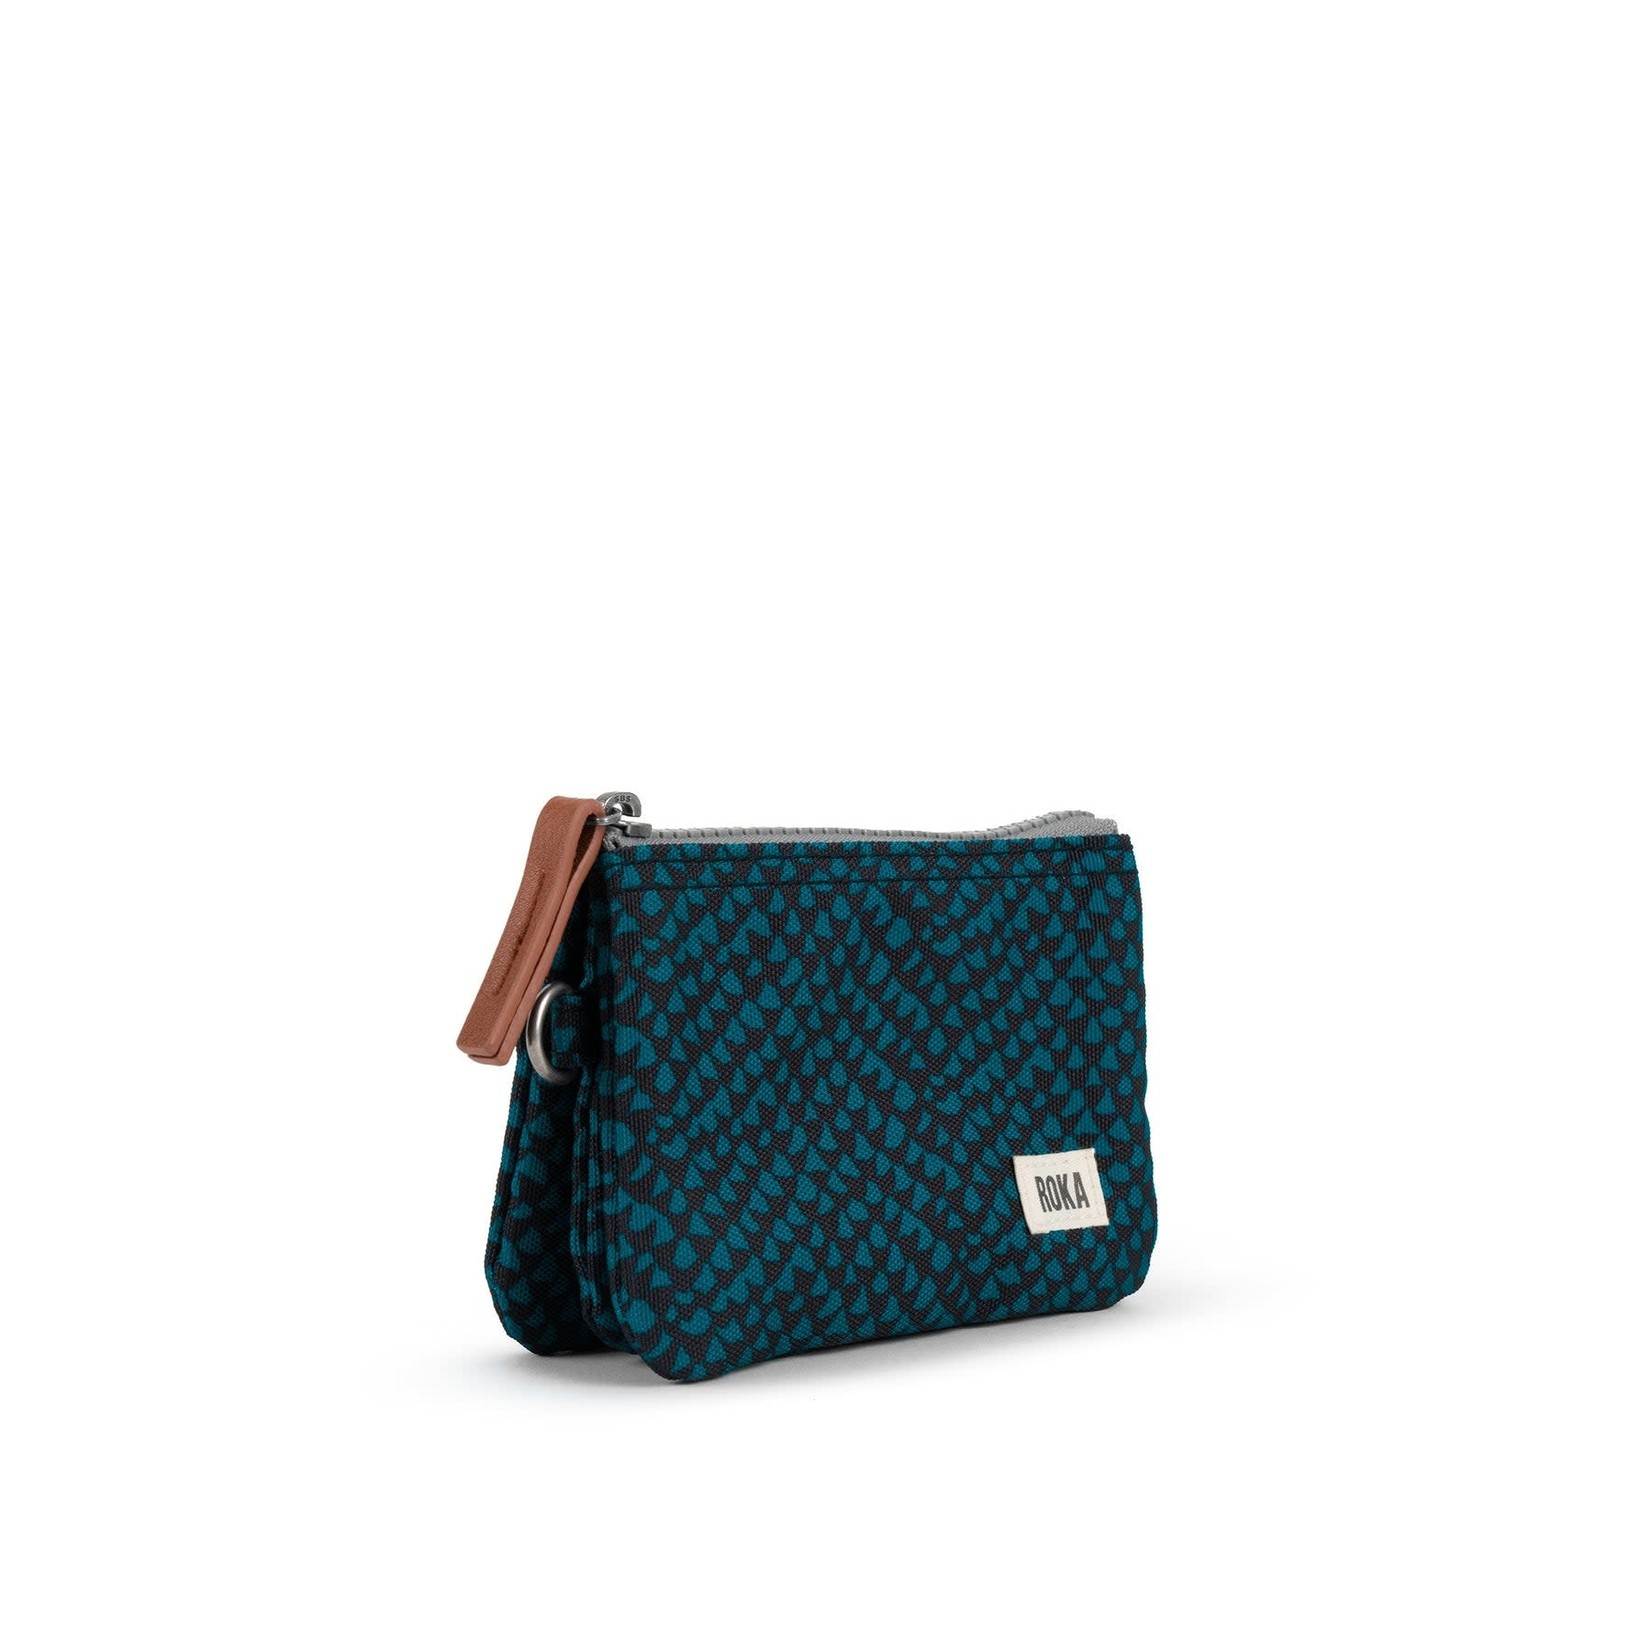 ROKA London Carnaby Teal snake Small Recycled Canvas